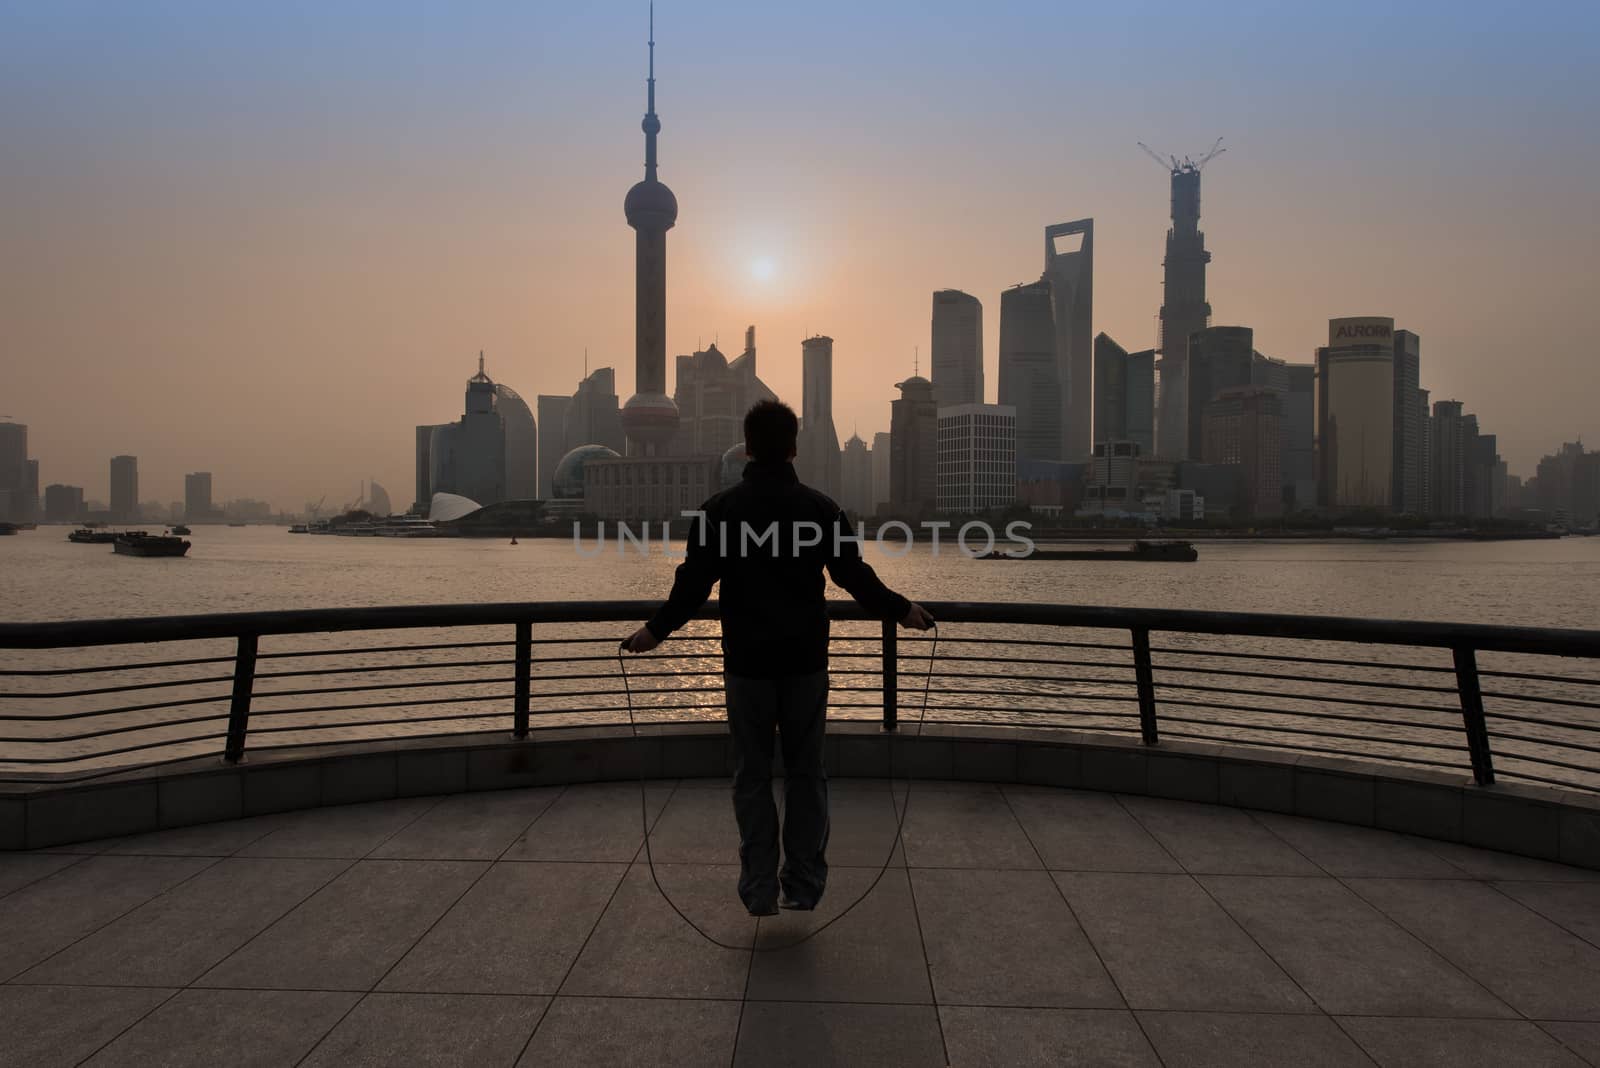 Shanghai, China - April 7, 2013: chinese man exercising jumping rope the bund waterfront at the city of Shanghai in China on april 7th, 2013